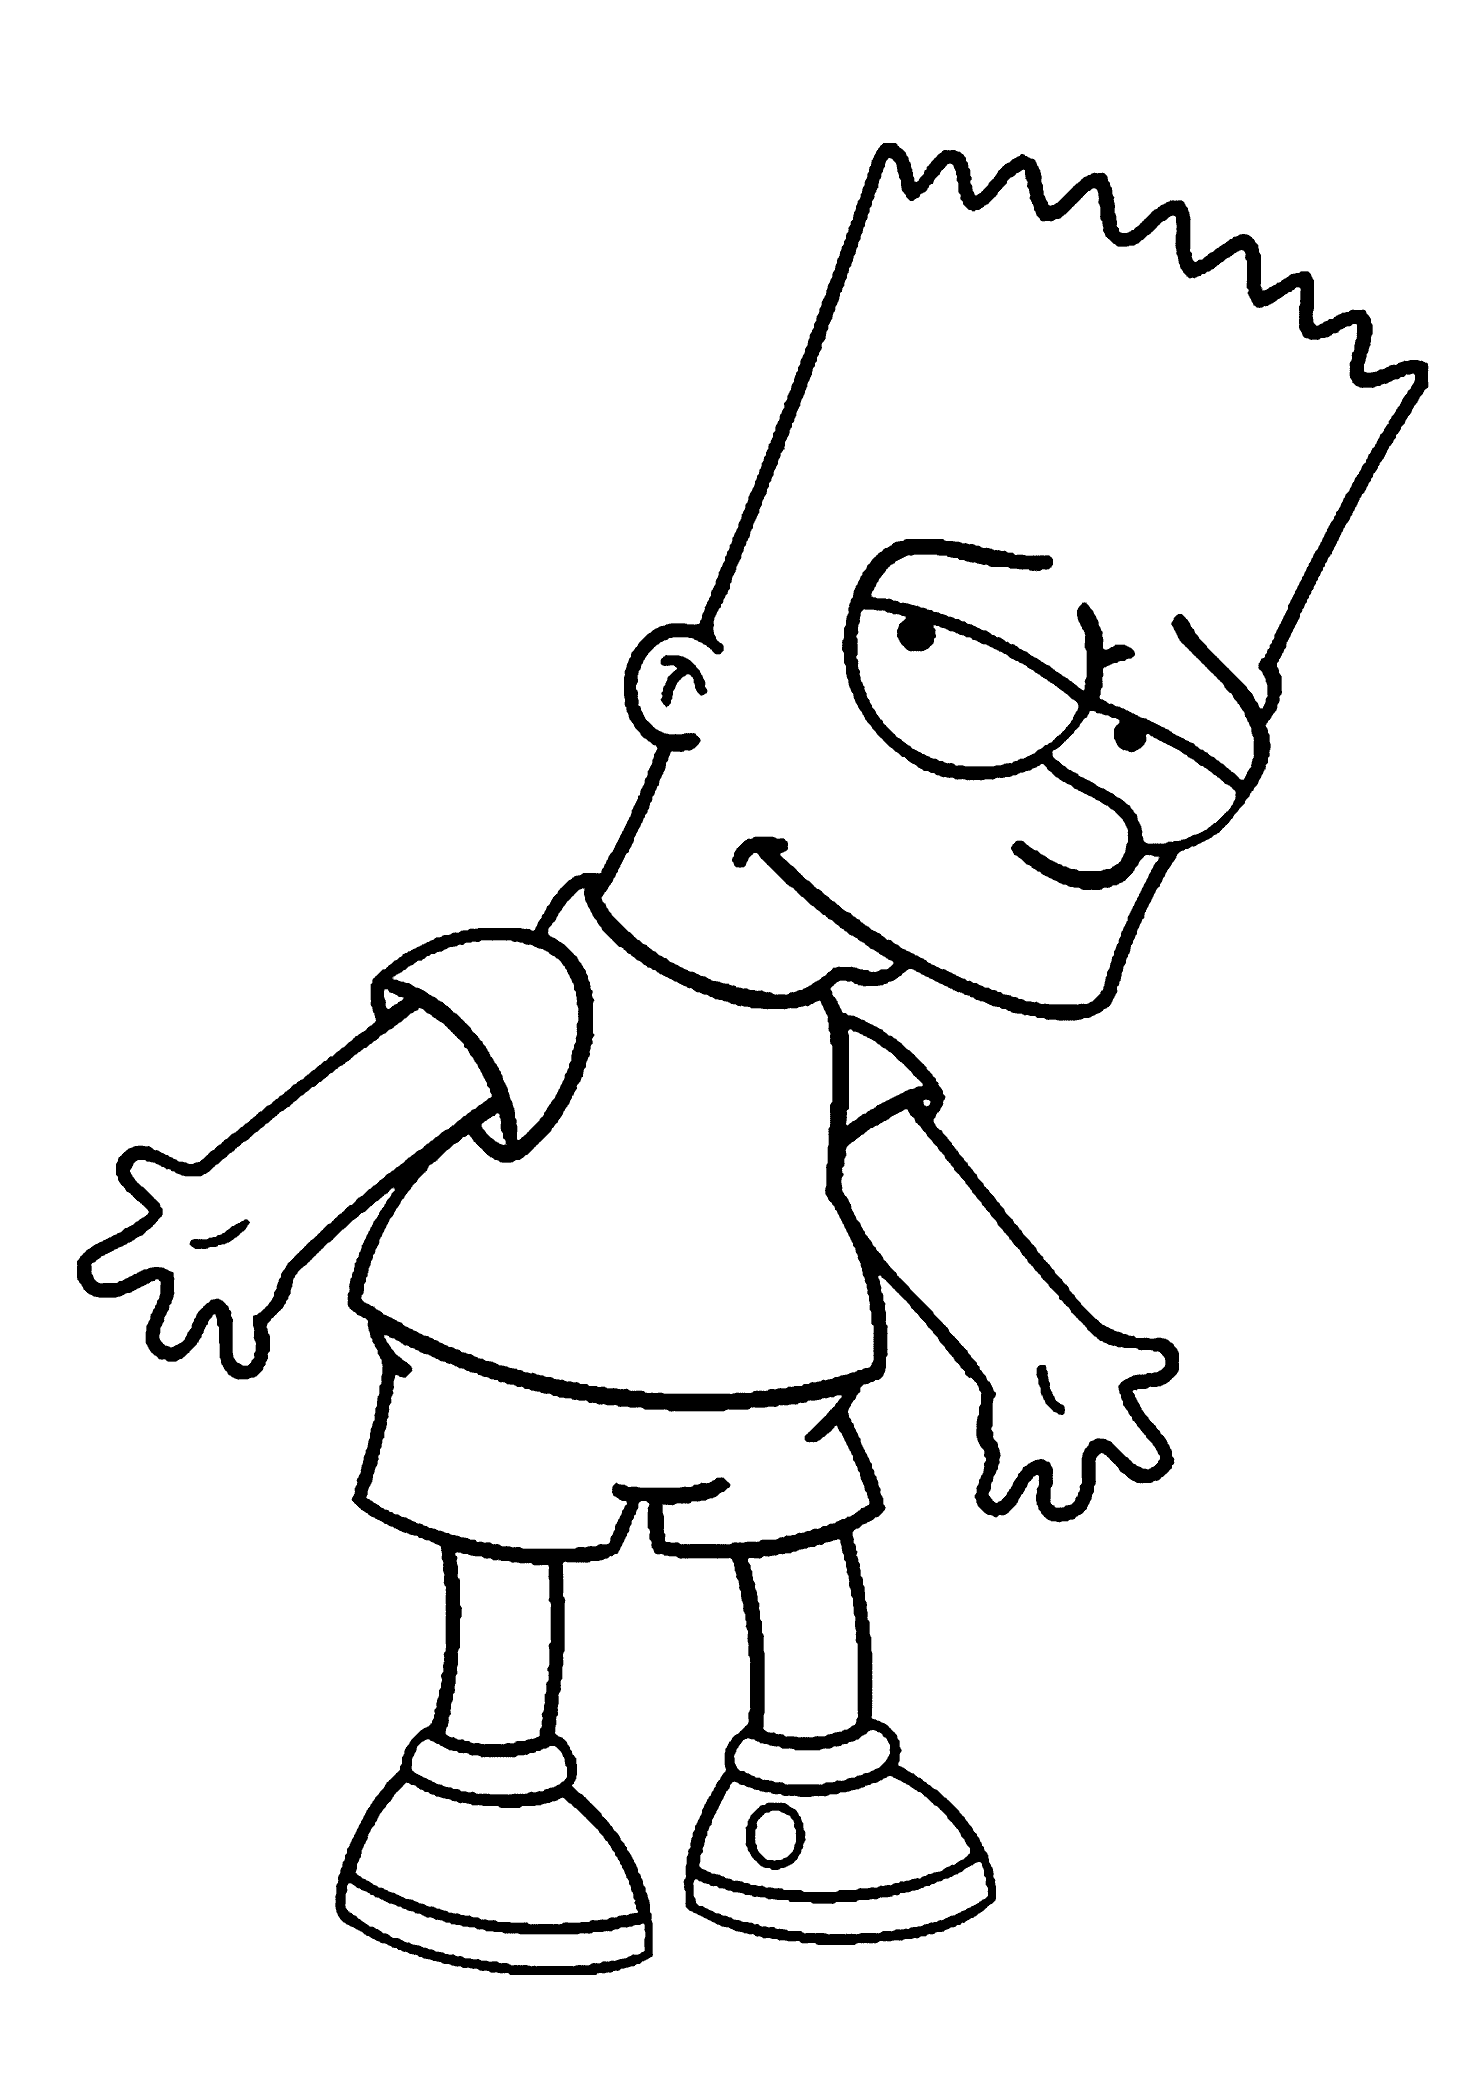 Bart Simpson Sketching Guide